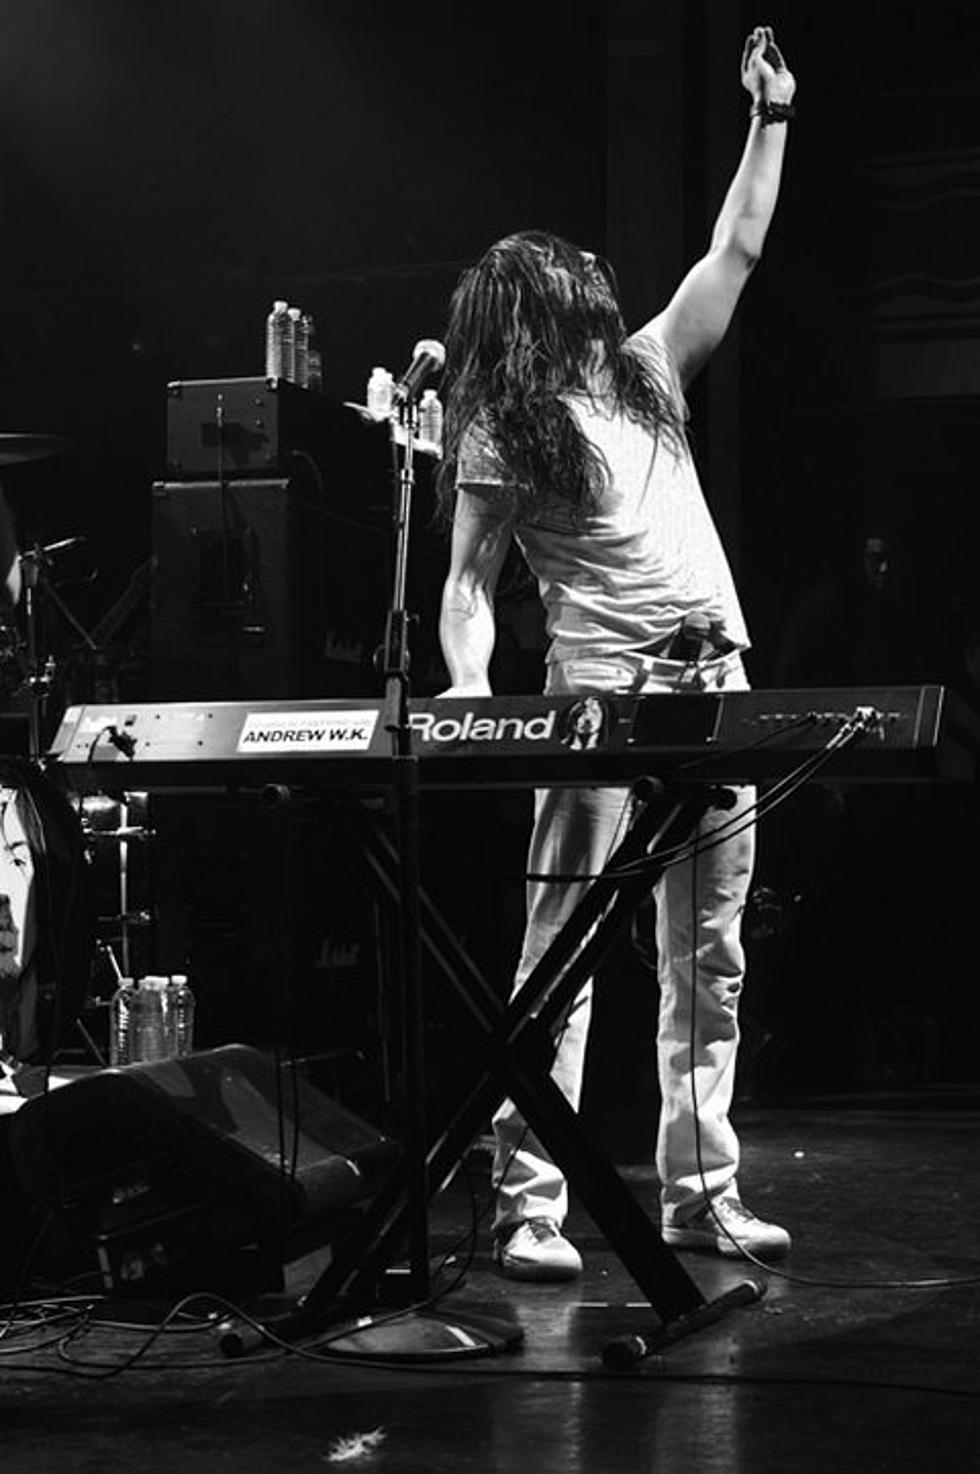 Andrew W.K. to play &#8220;1,000,000 volts of party music&#8221; through David Blaine&#8217;s body; hosting Conflict of Interest 2012